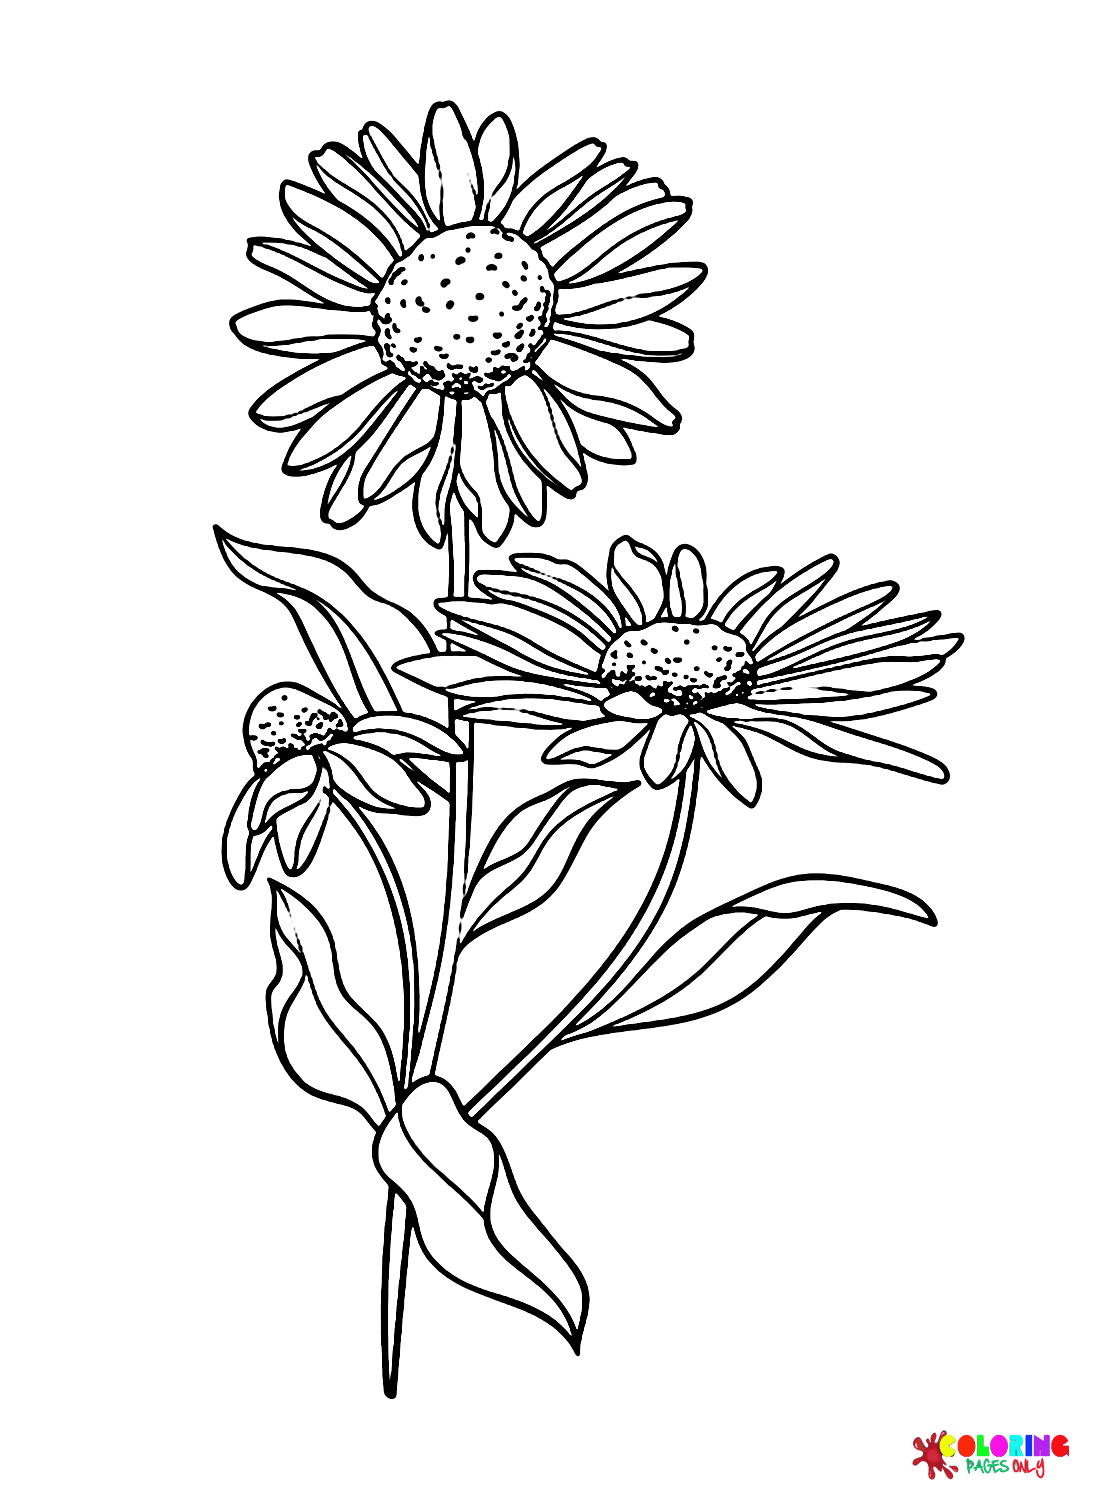 Printable Daisy Flowers Coloring Page